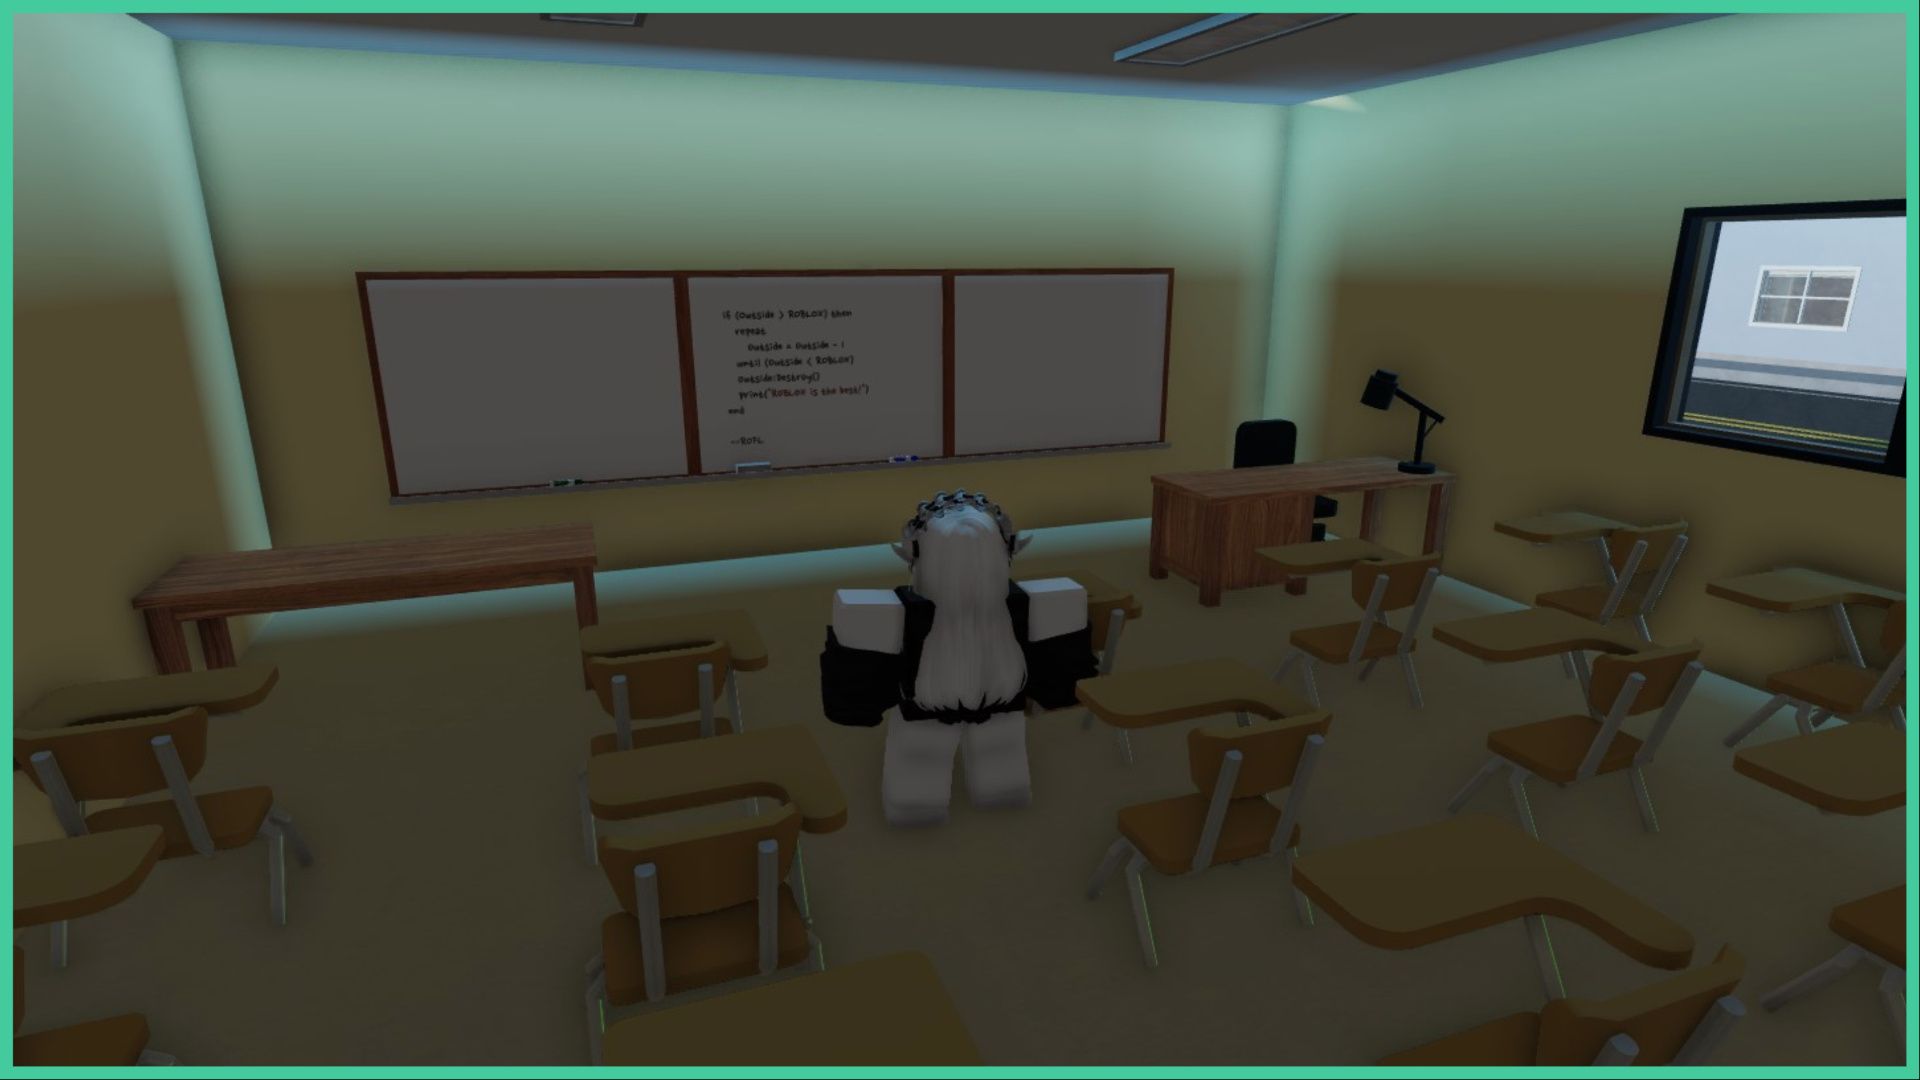 feature image for our omini x classes guide, the image features a player standing inside a darkly lit classroom, with three whiteboards on the wall and multiple desks and chairs, with the teacher's desk to the right with a office chair and lamp on the table